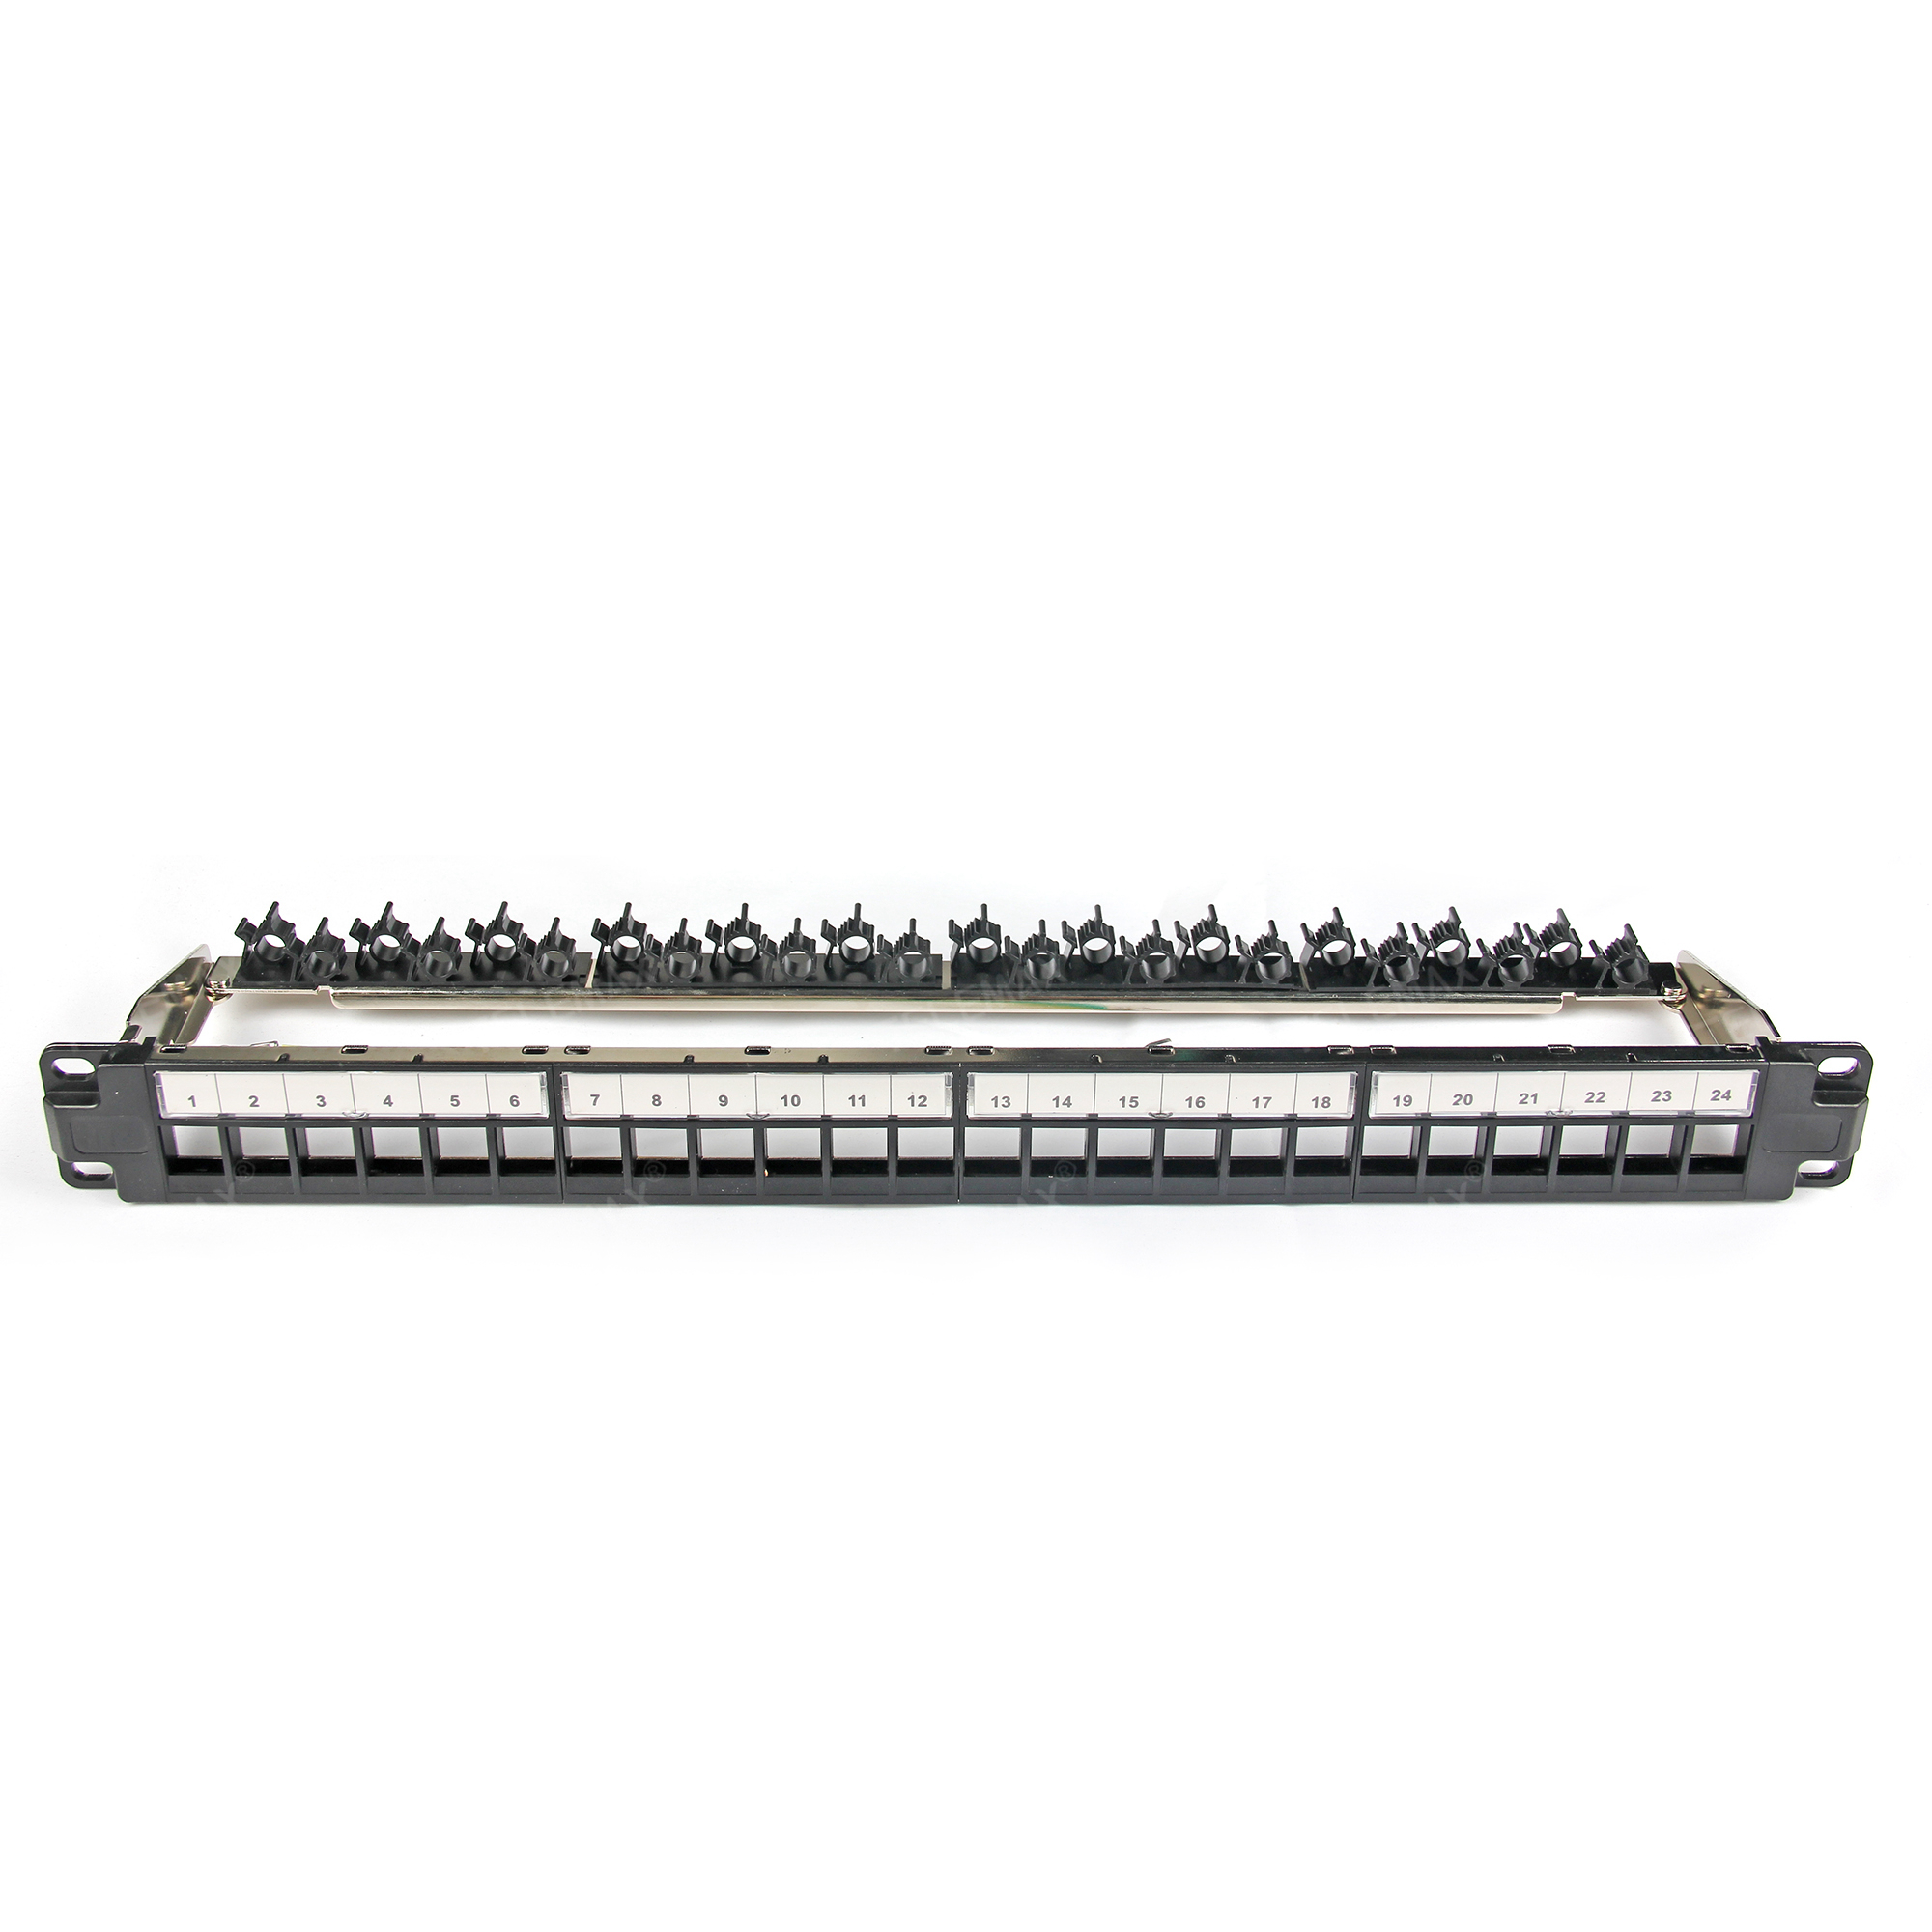 1U 19'' 24 Ports FTP Blank patch panel with Cable Holder